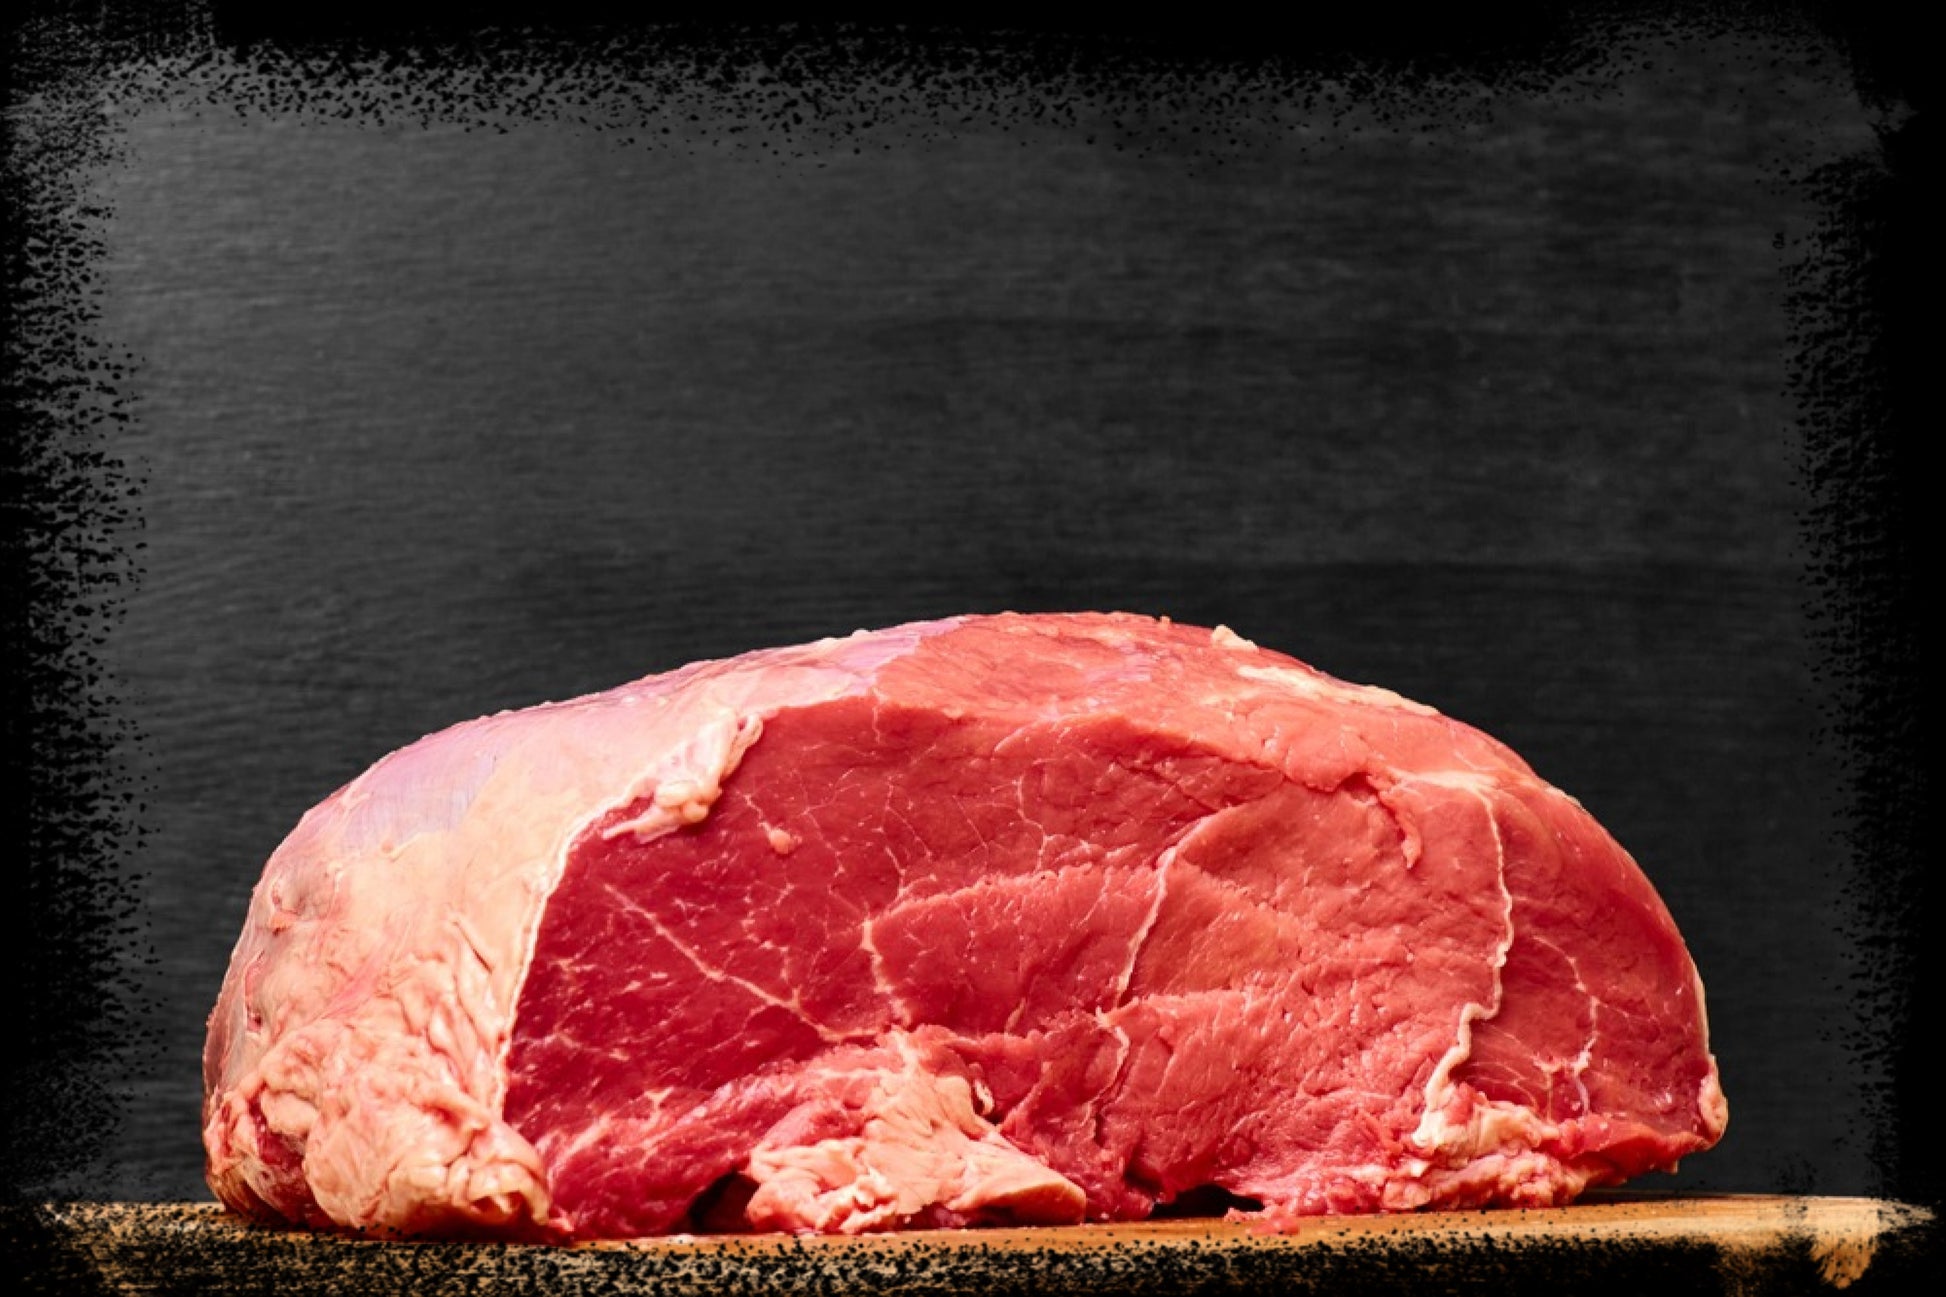 Grass-Fed Beef Topside, Australia (Dhs 42.90/kg) - Chilled